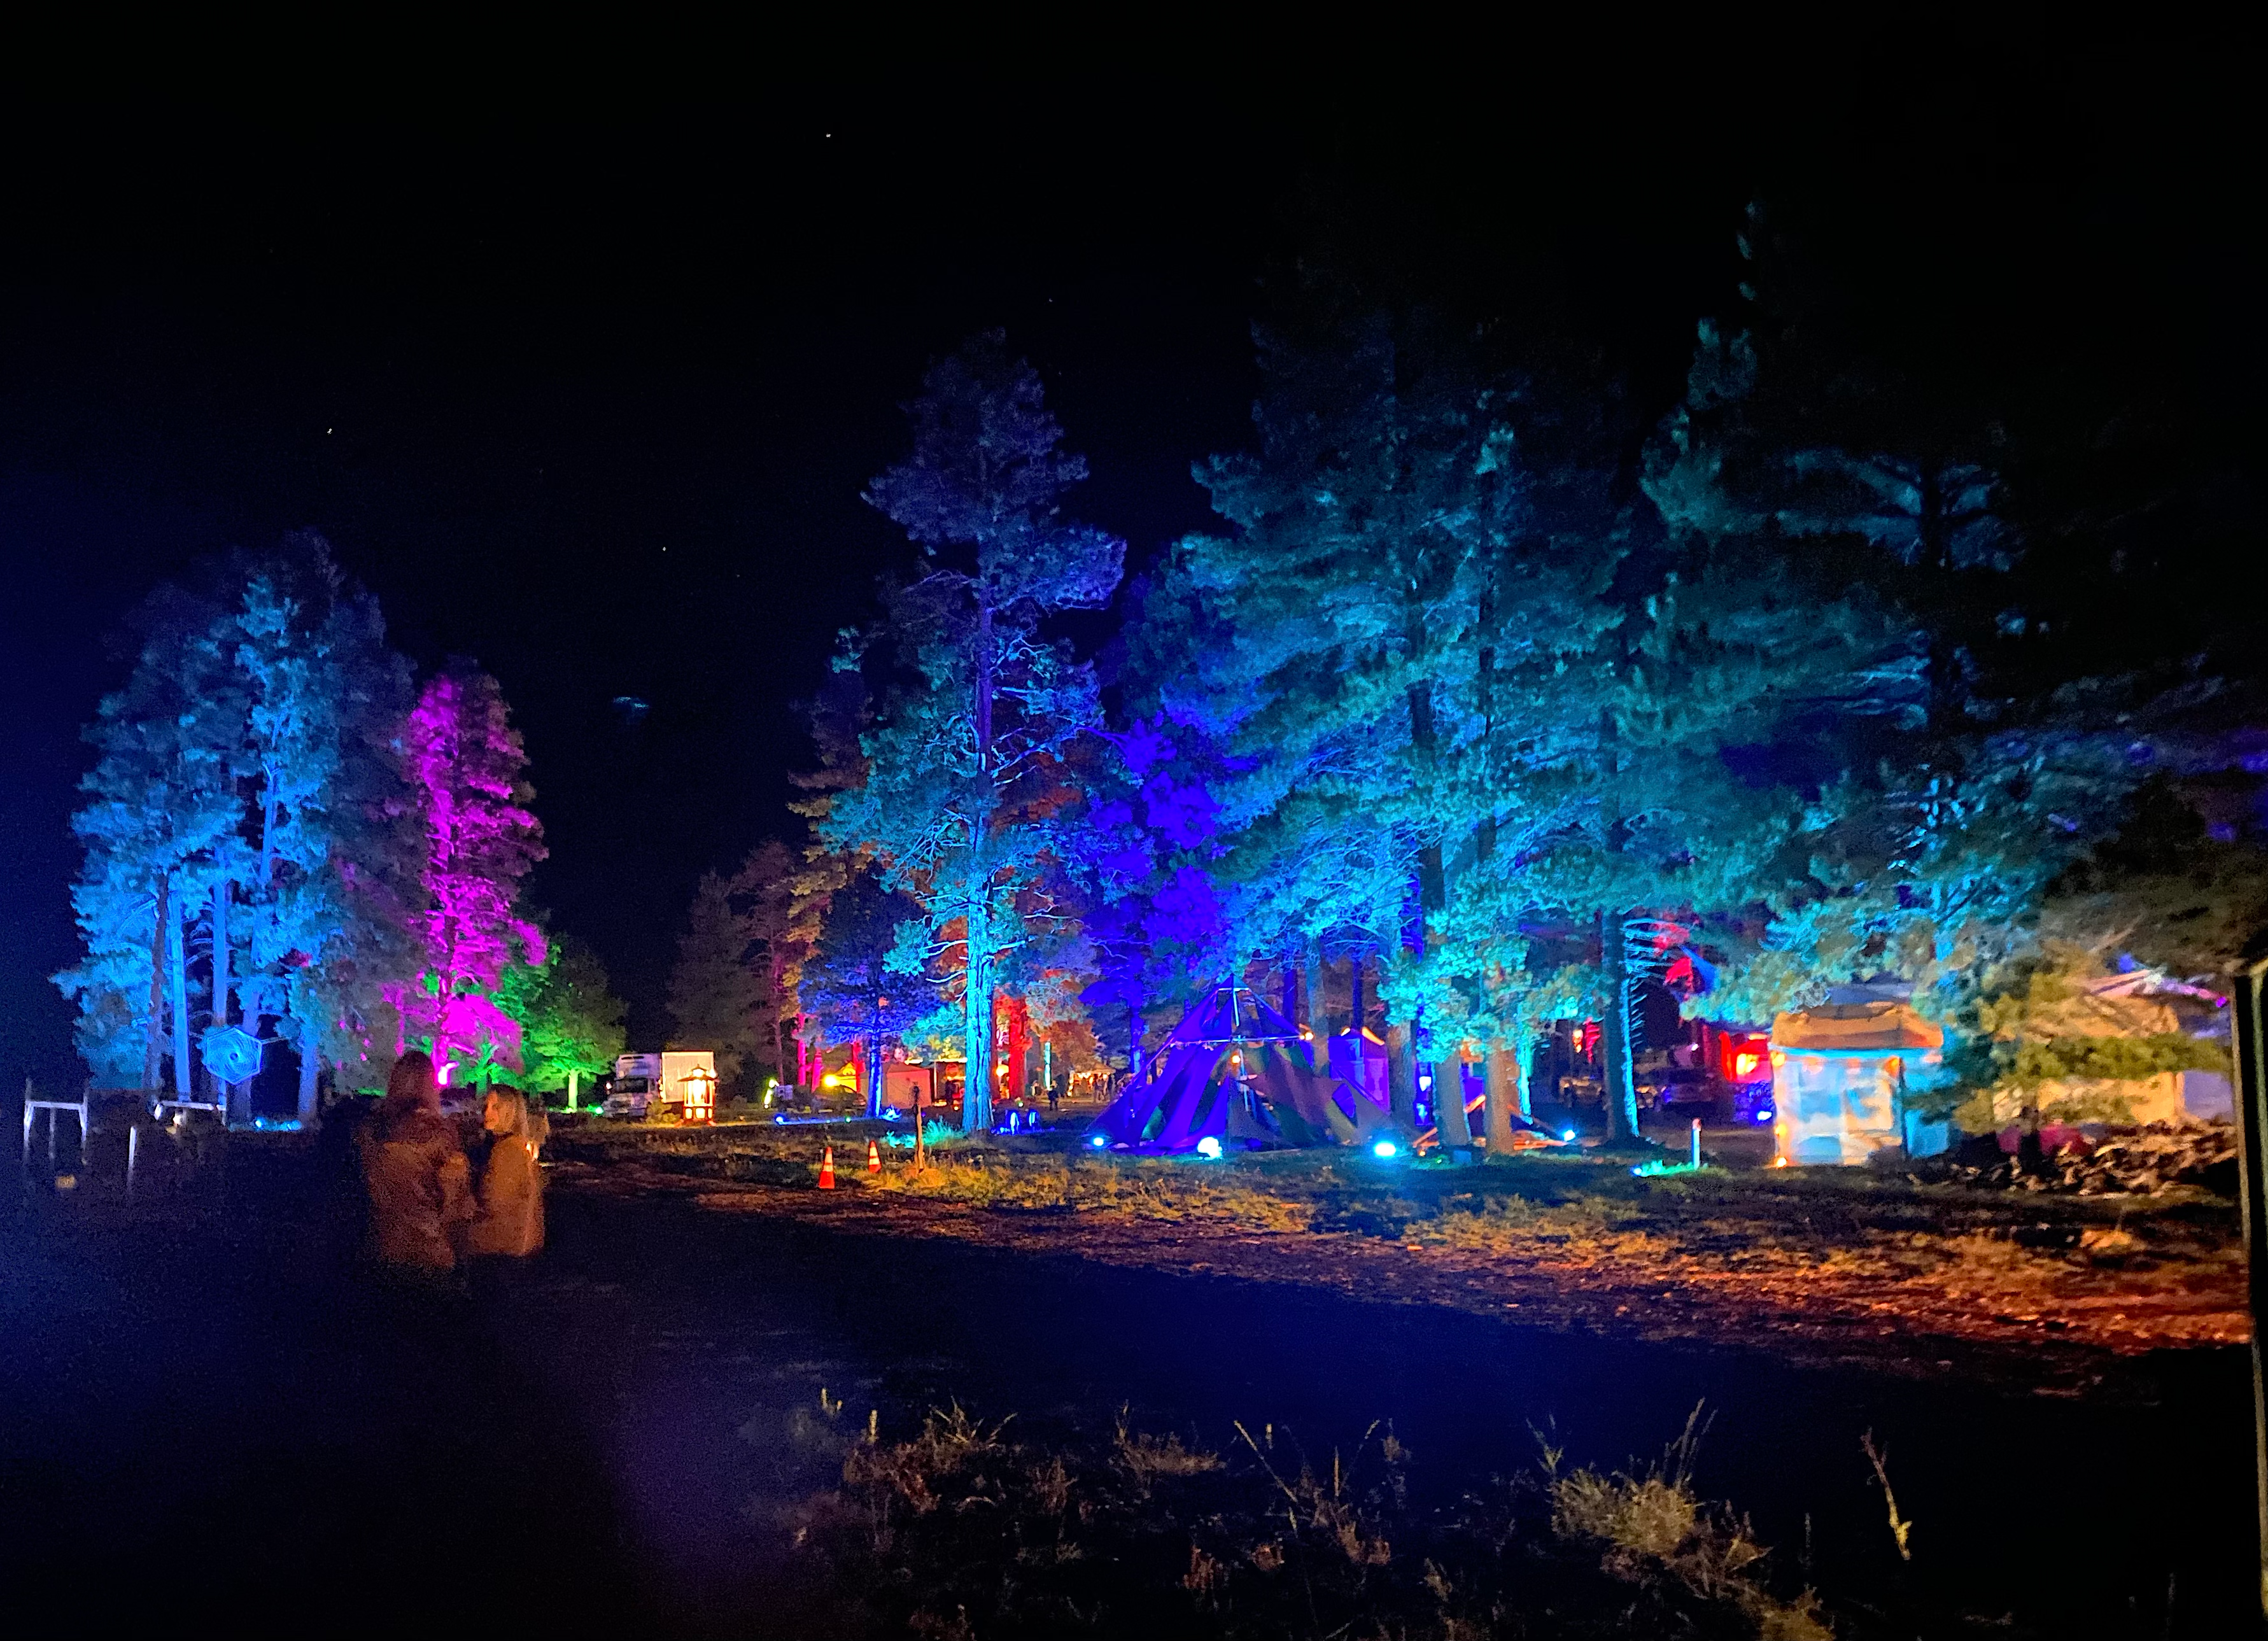 The Ponderosa Pines are illuminated with colorful lights as attendees arrive at the main festival area. Photo by: Marissa Novel.